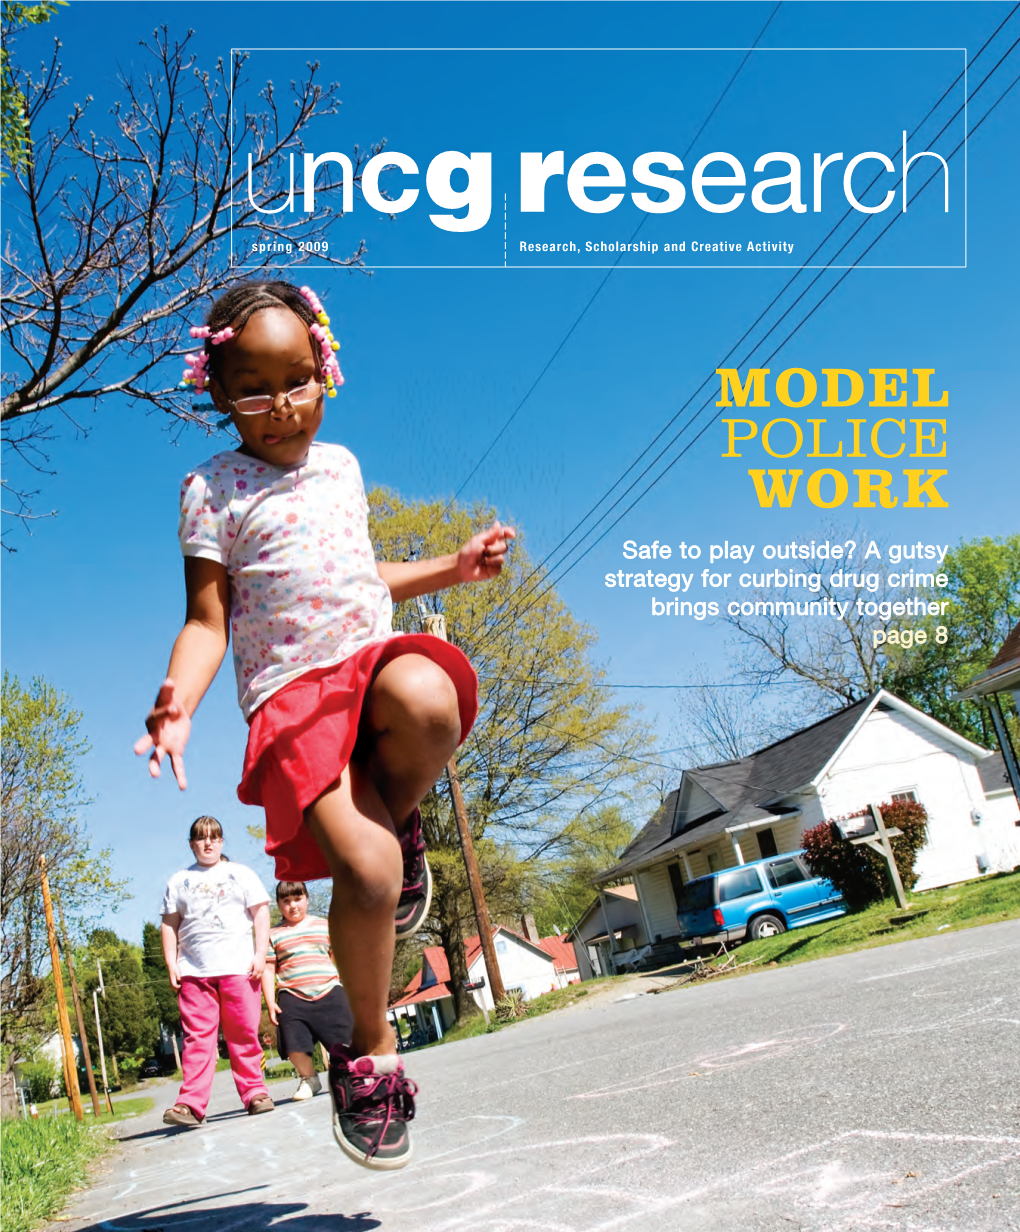 Model Police Work Safe to Play Outside? a Gutsy Strategy for Curbing Drug Crime Brings Community Together Page 8 Uncg Research